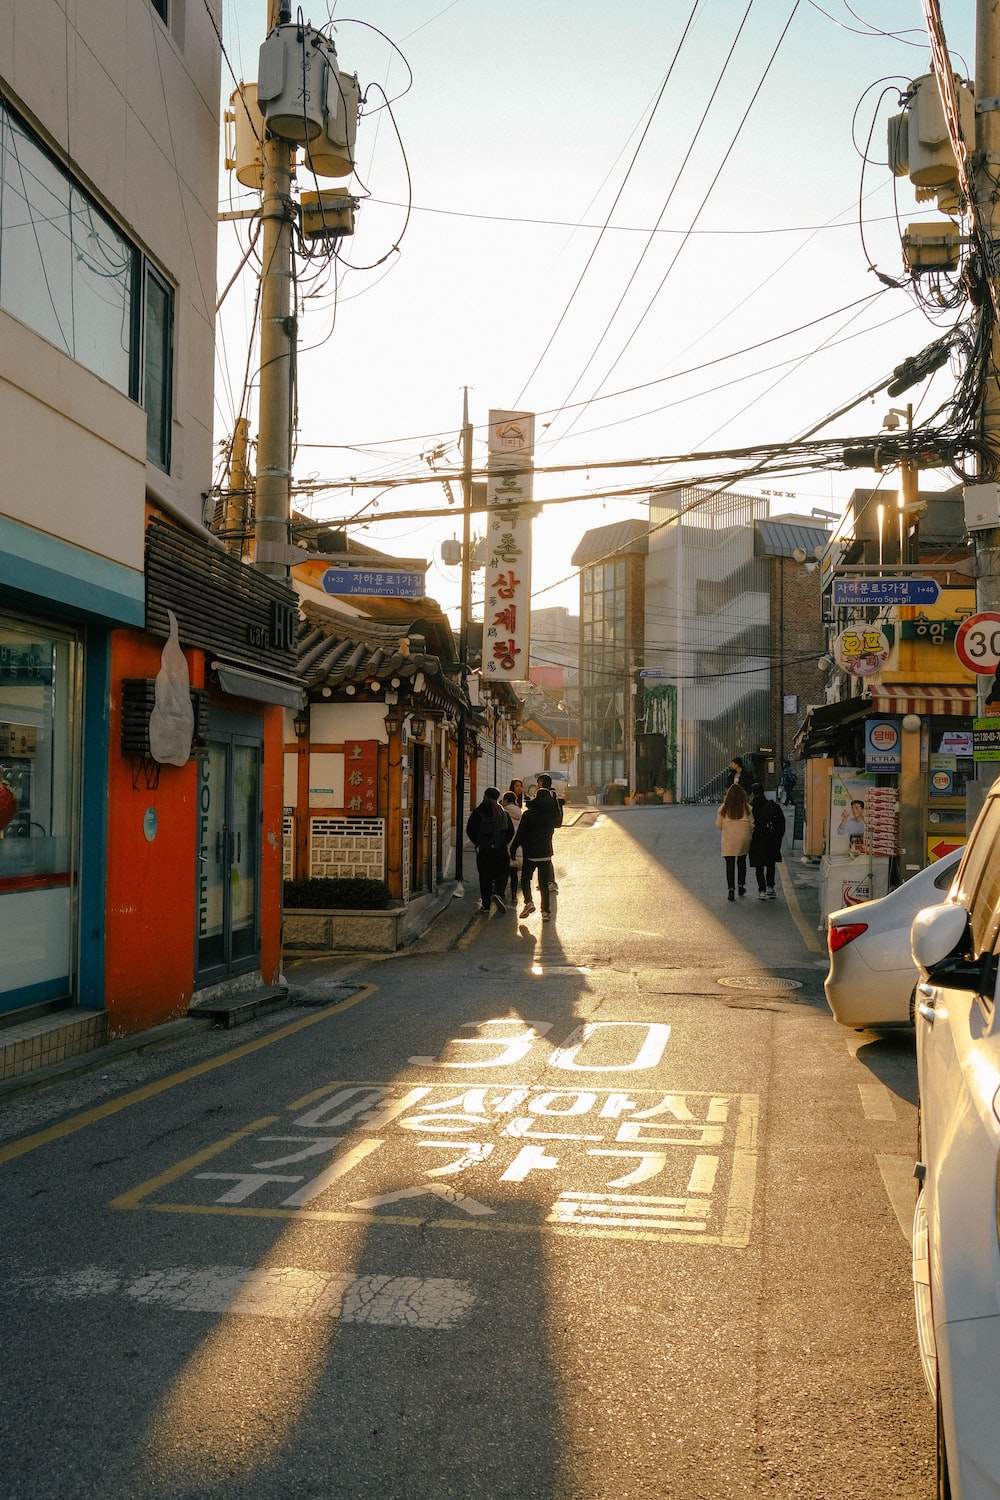 Seoul street pictures download free images on